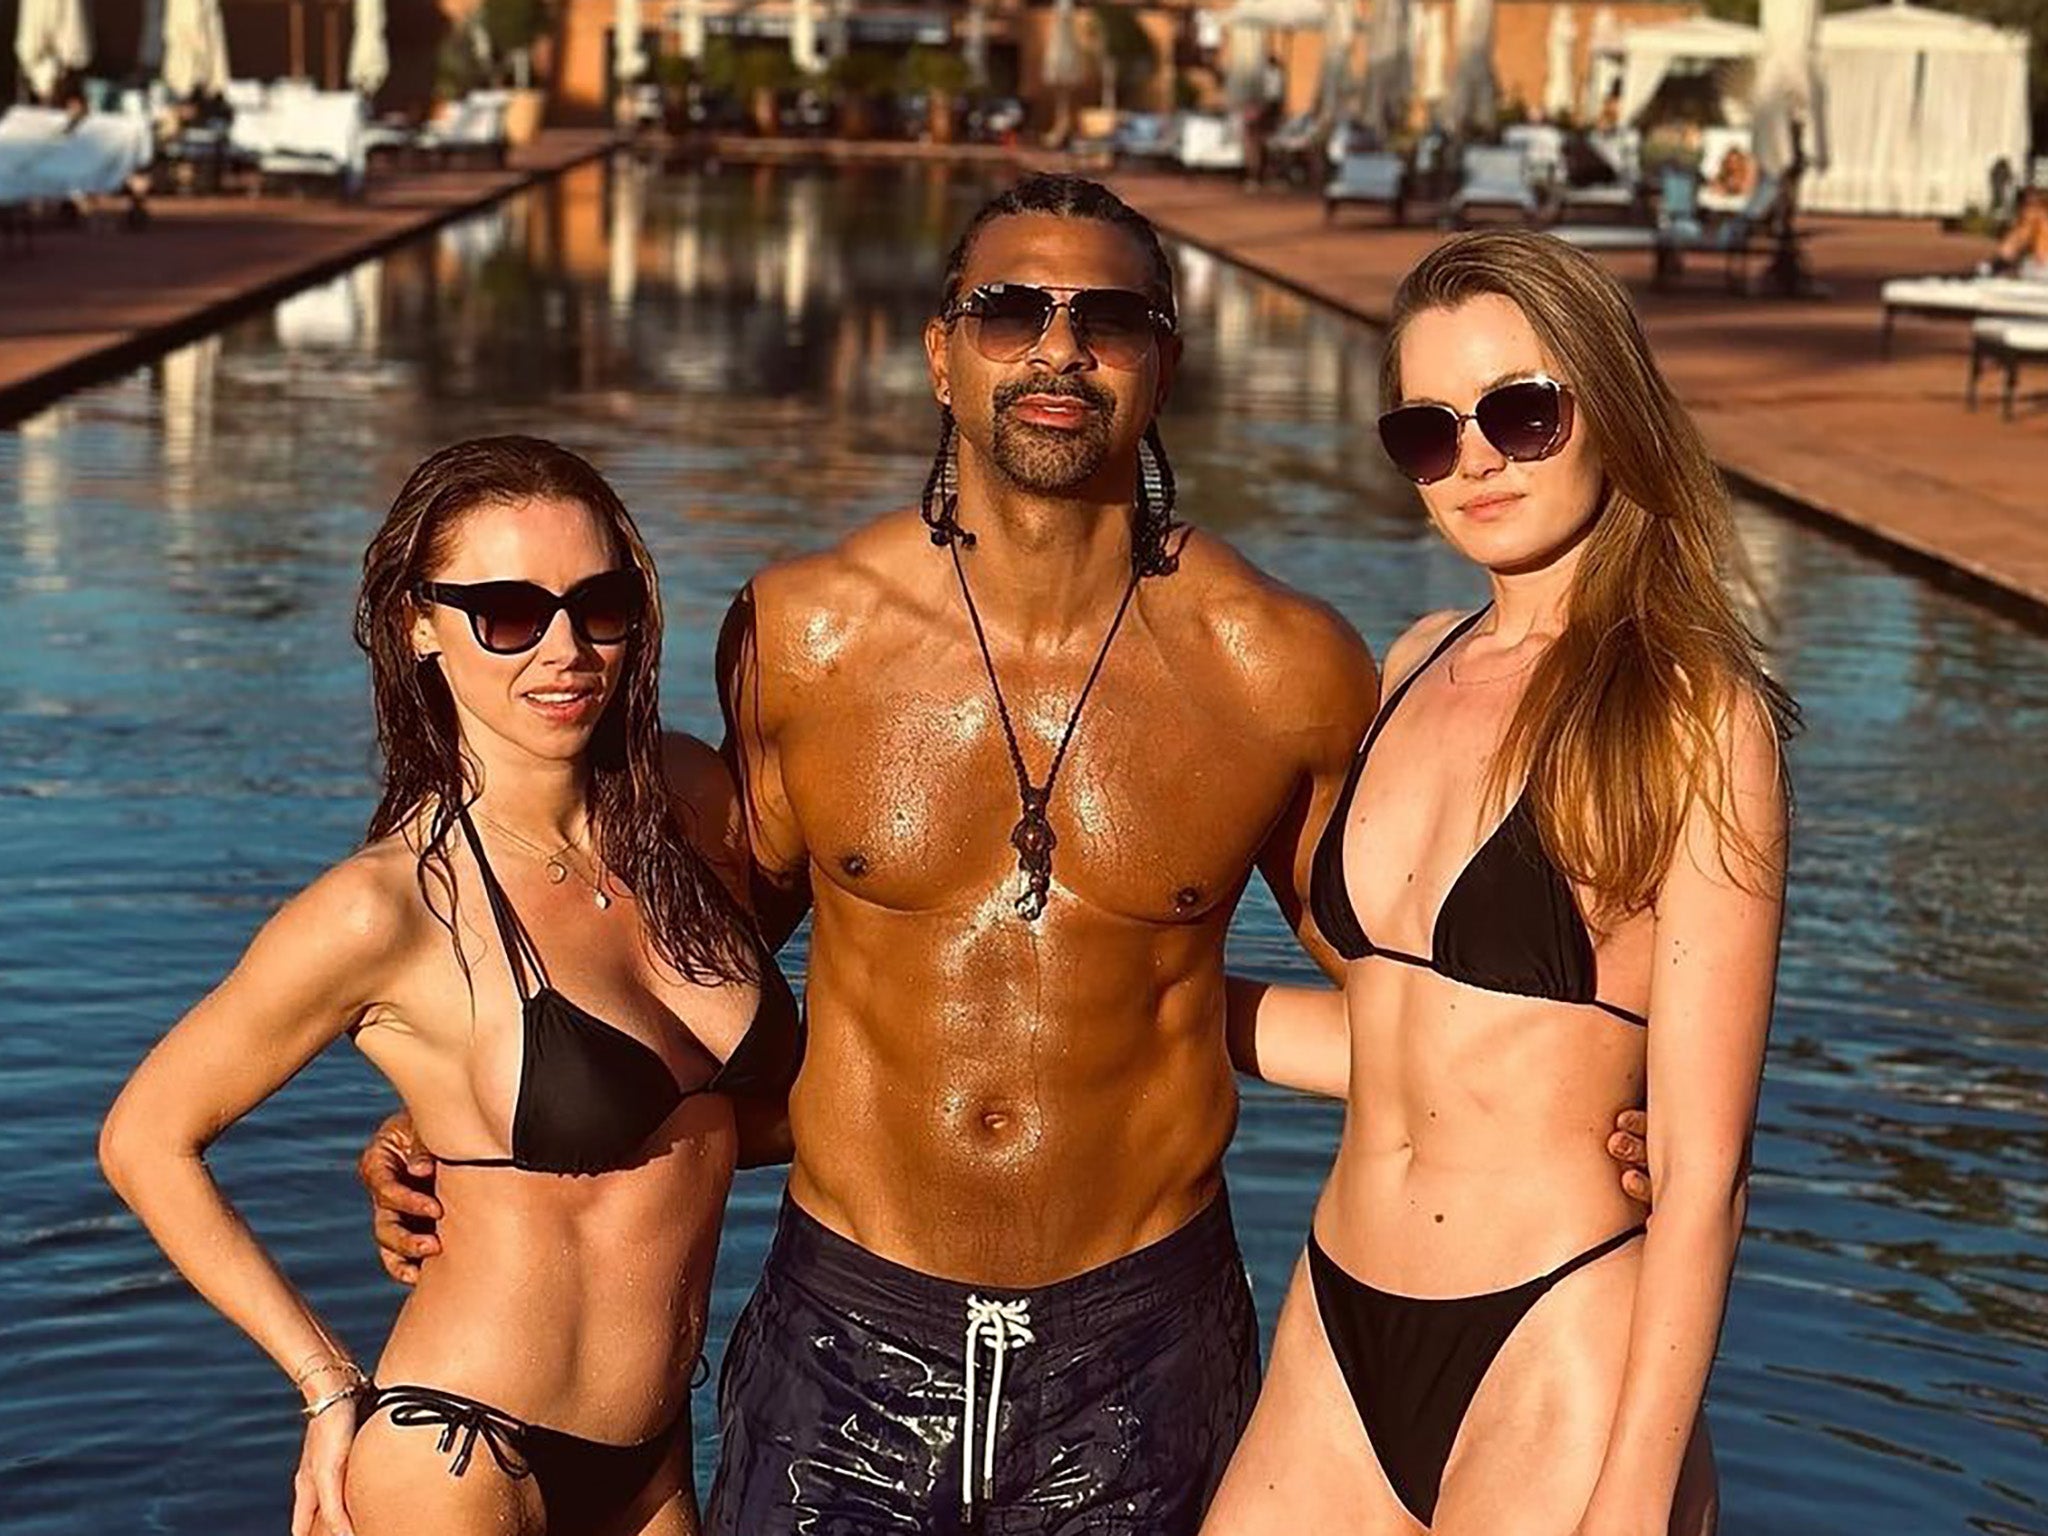 David Haye, Una Healy and Sian Osborne Can throuples or triad relationships really work? The Independent photo photo